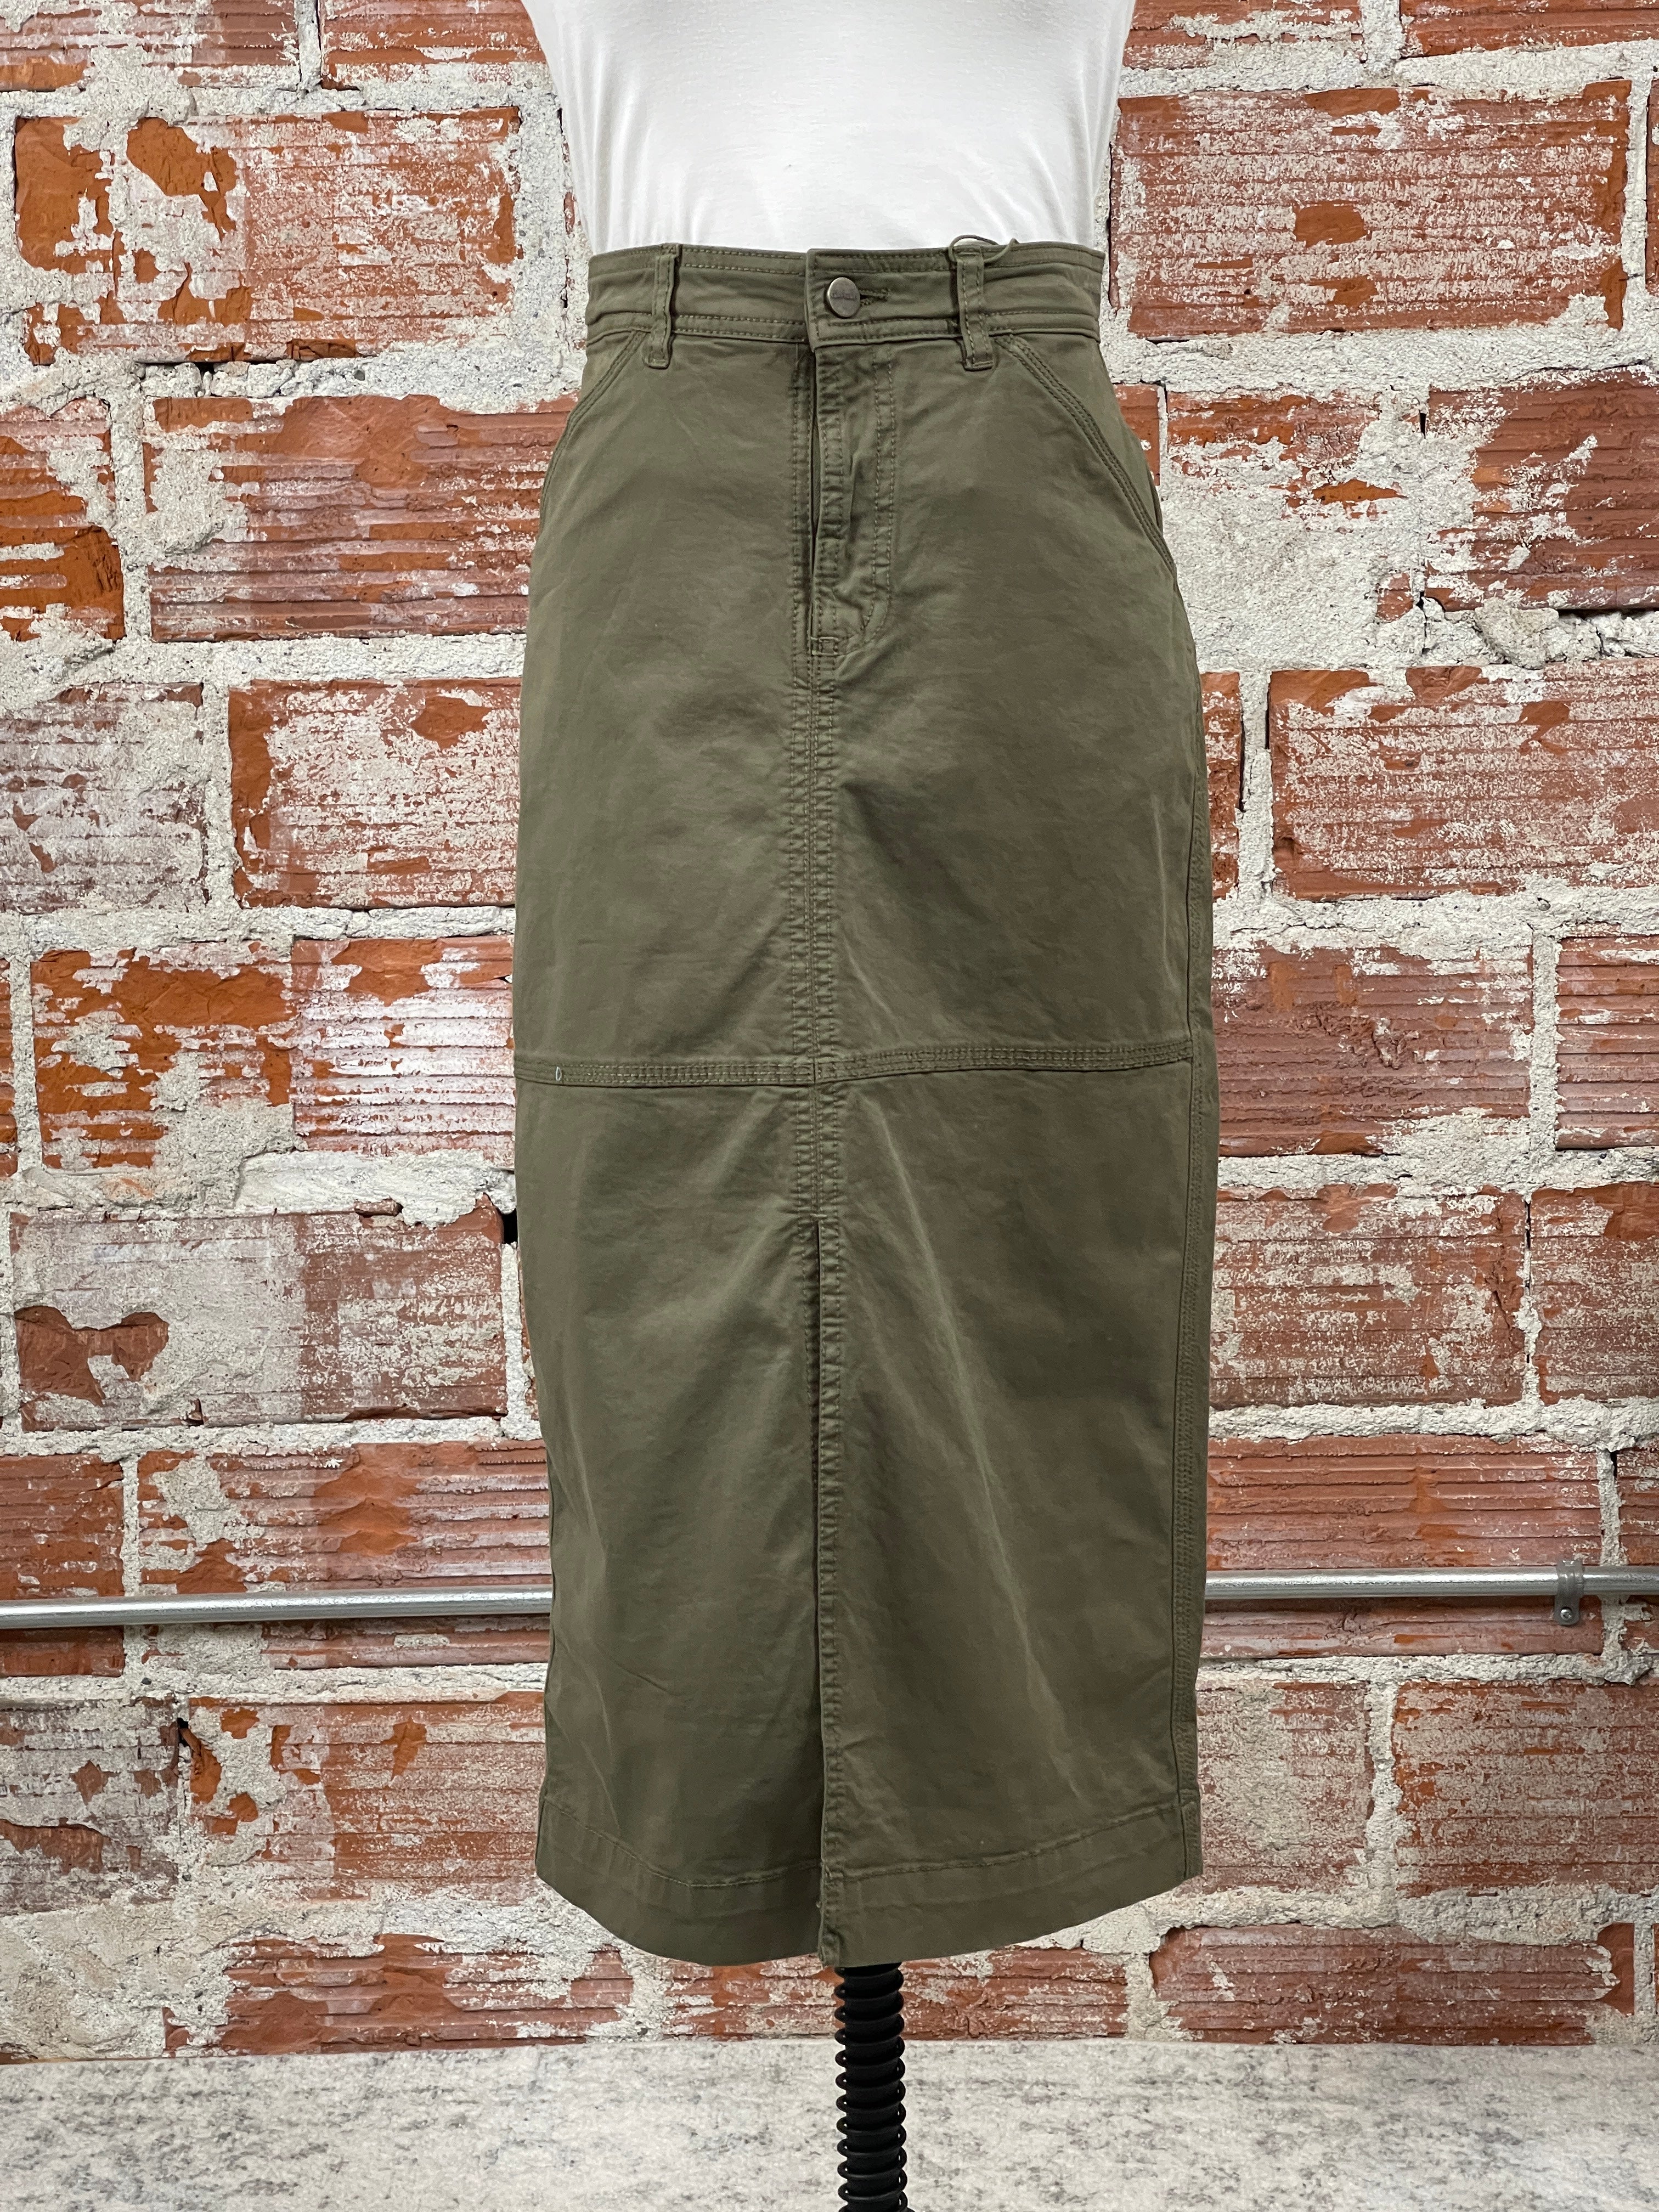 Sanctuary Triple Threat Skirt in Olive-231 Skirts-Little Bird Boutique